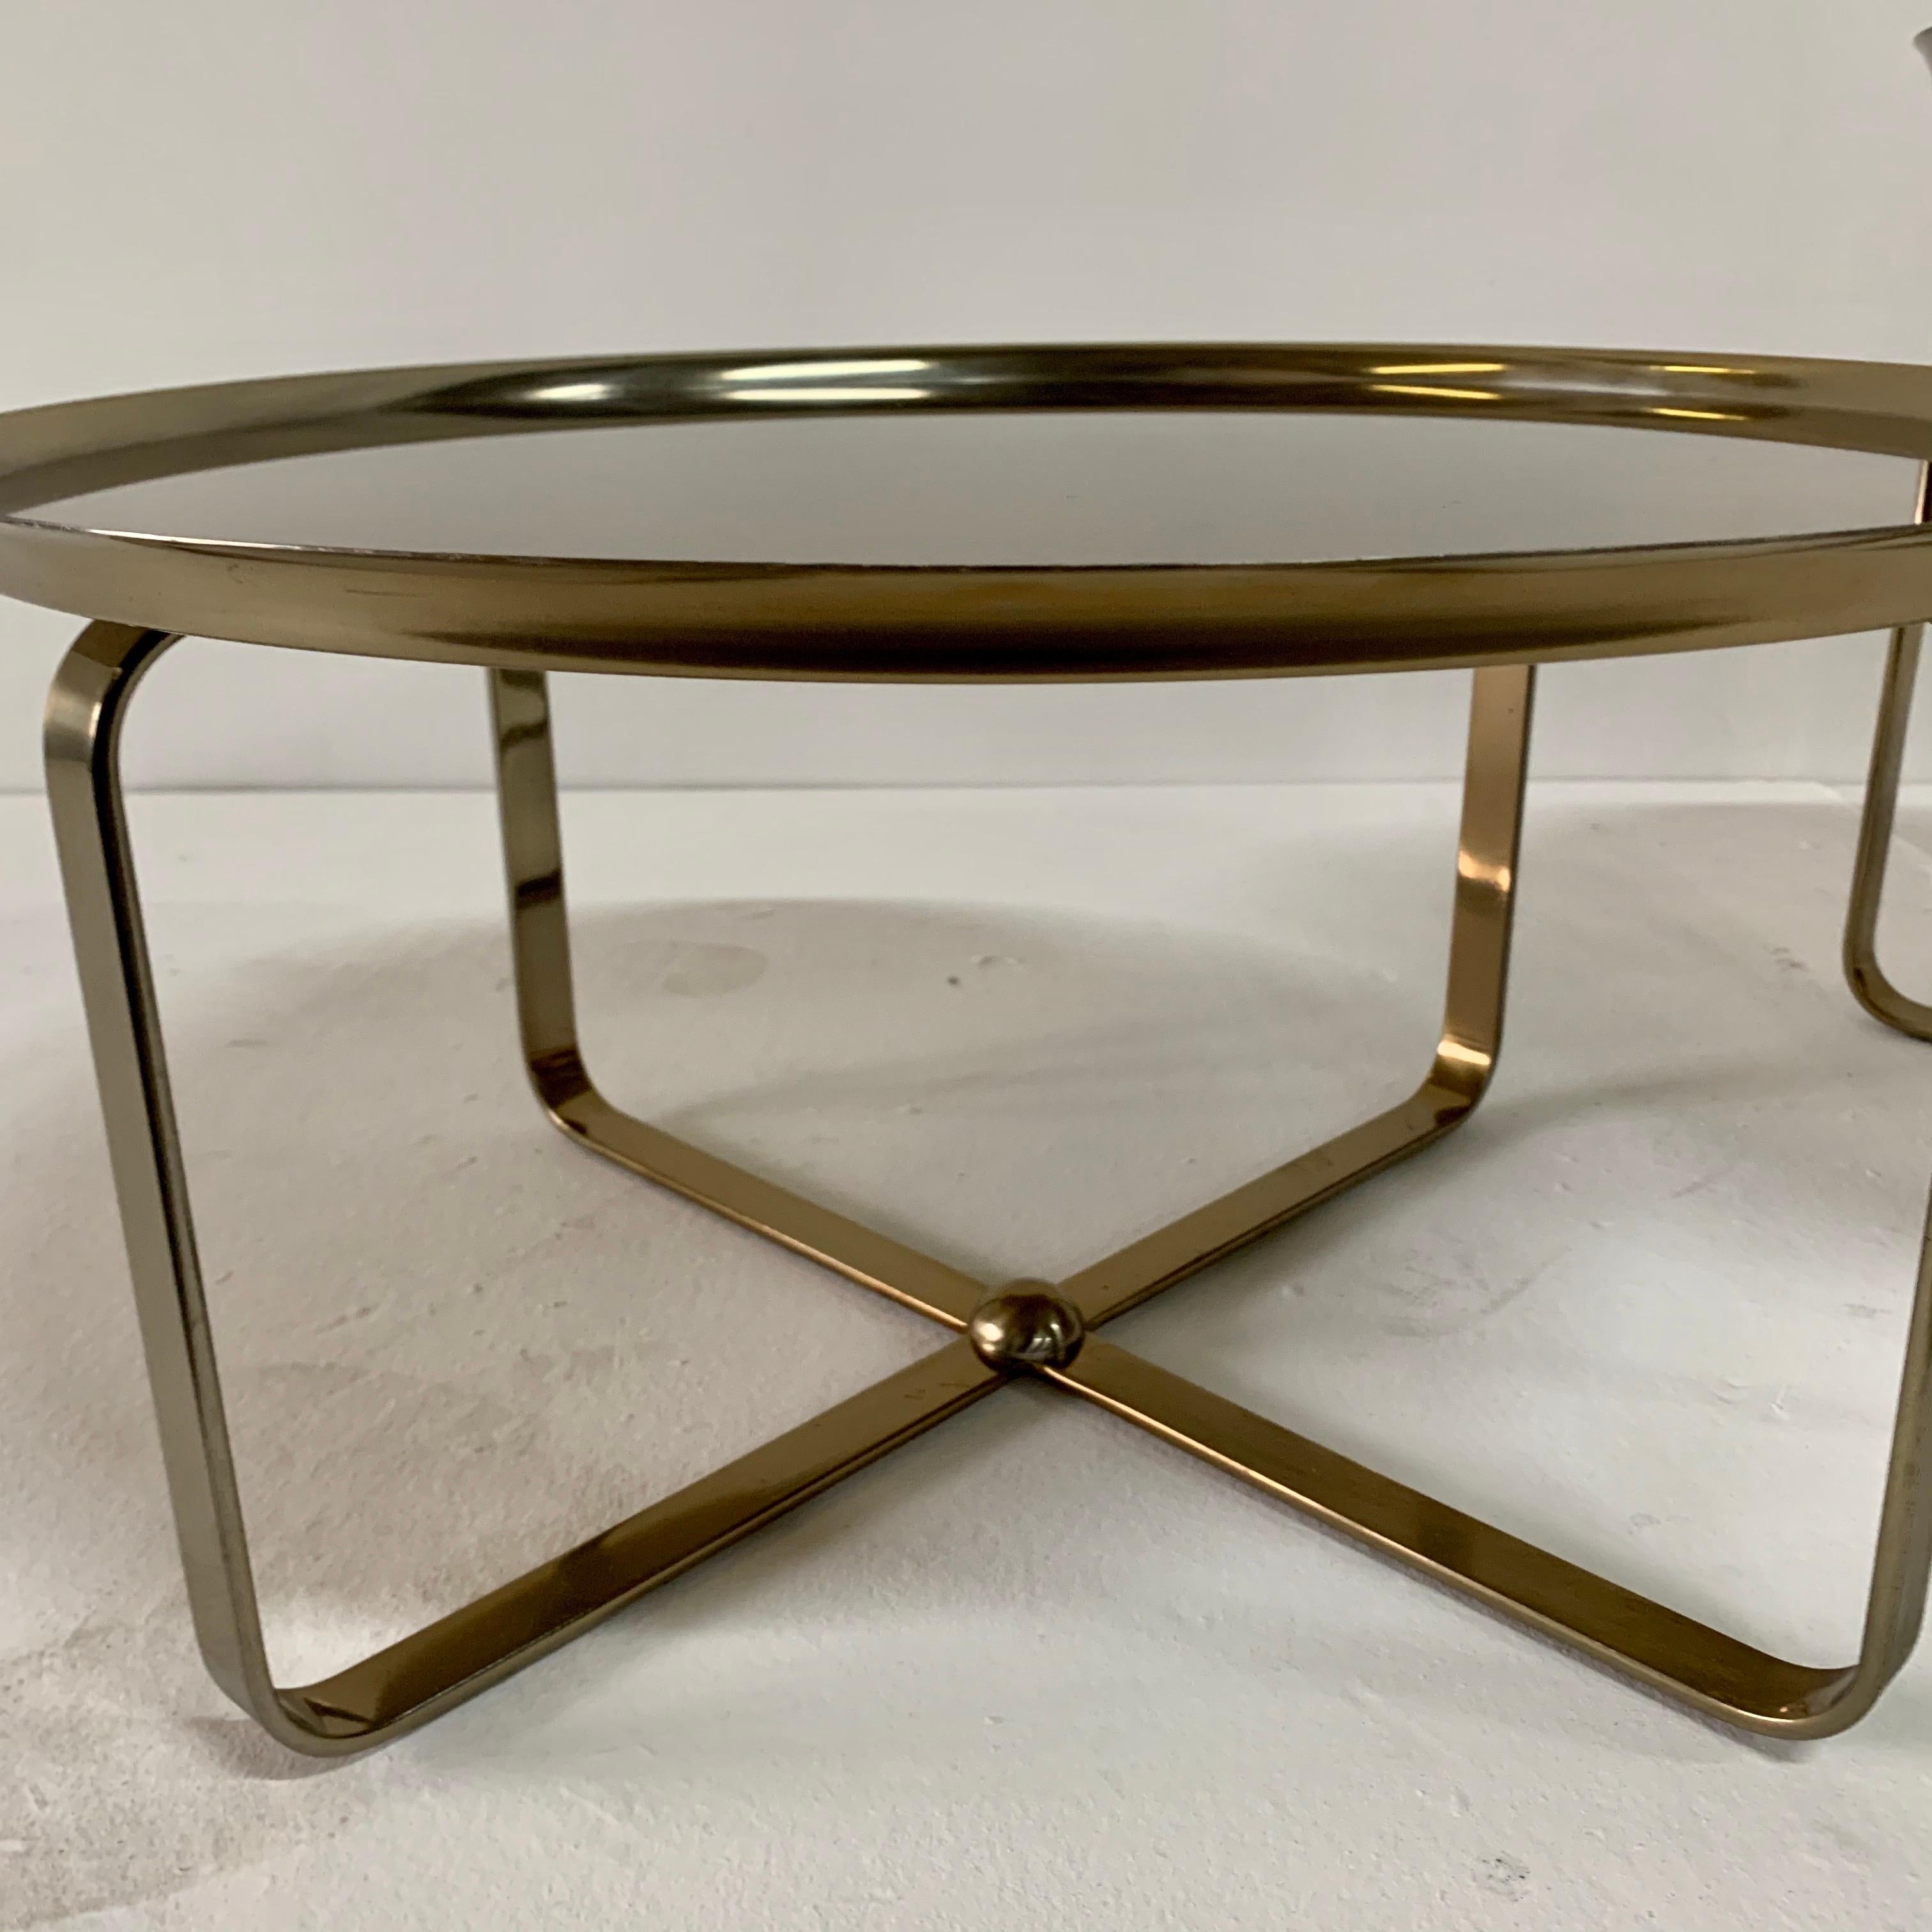 Matte Brass Finish Low Tiered Side Tables, Pair In Good Condition For Sale In East Hampton, NY